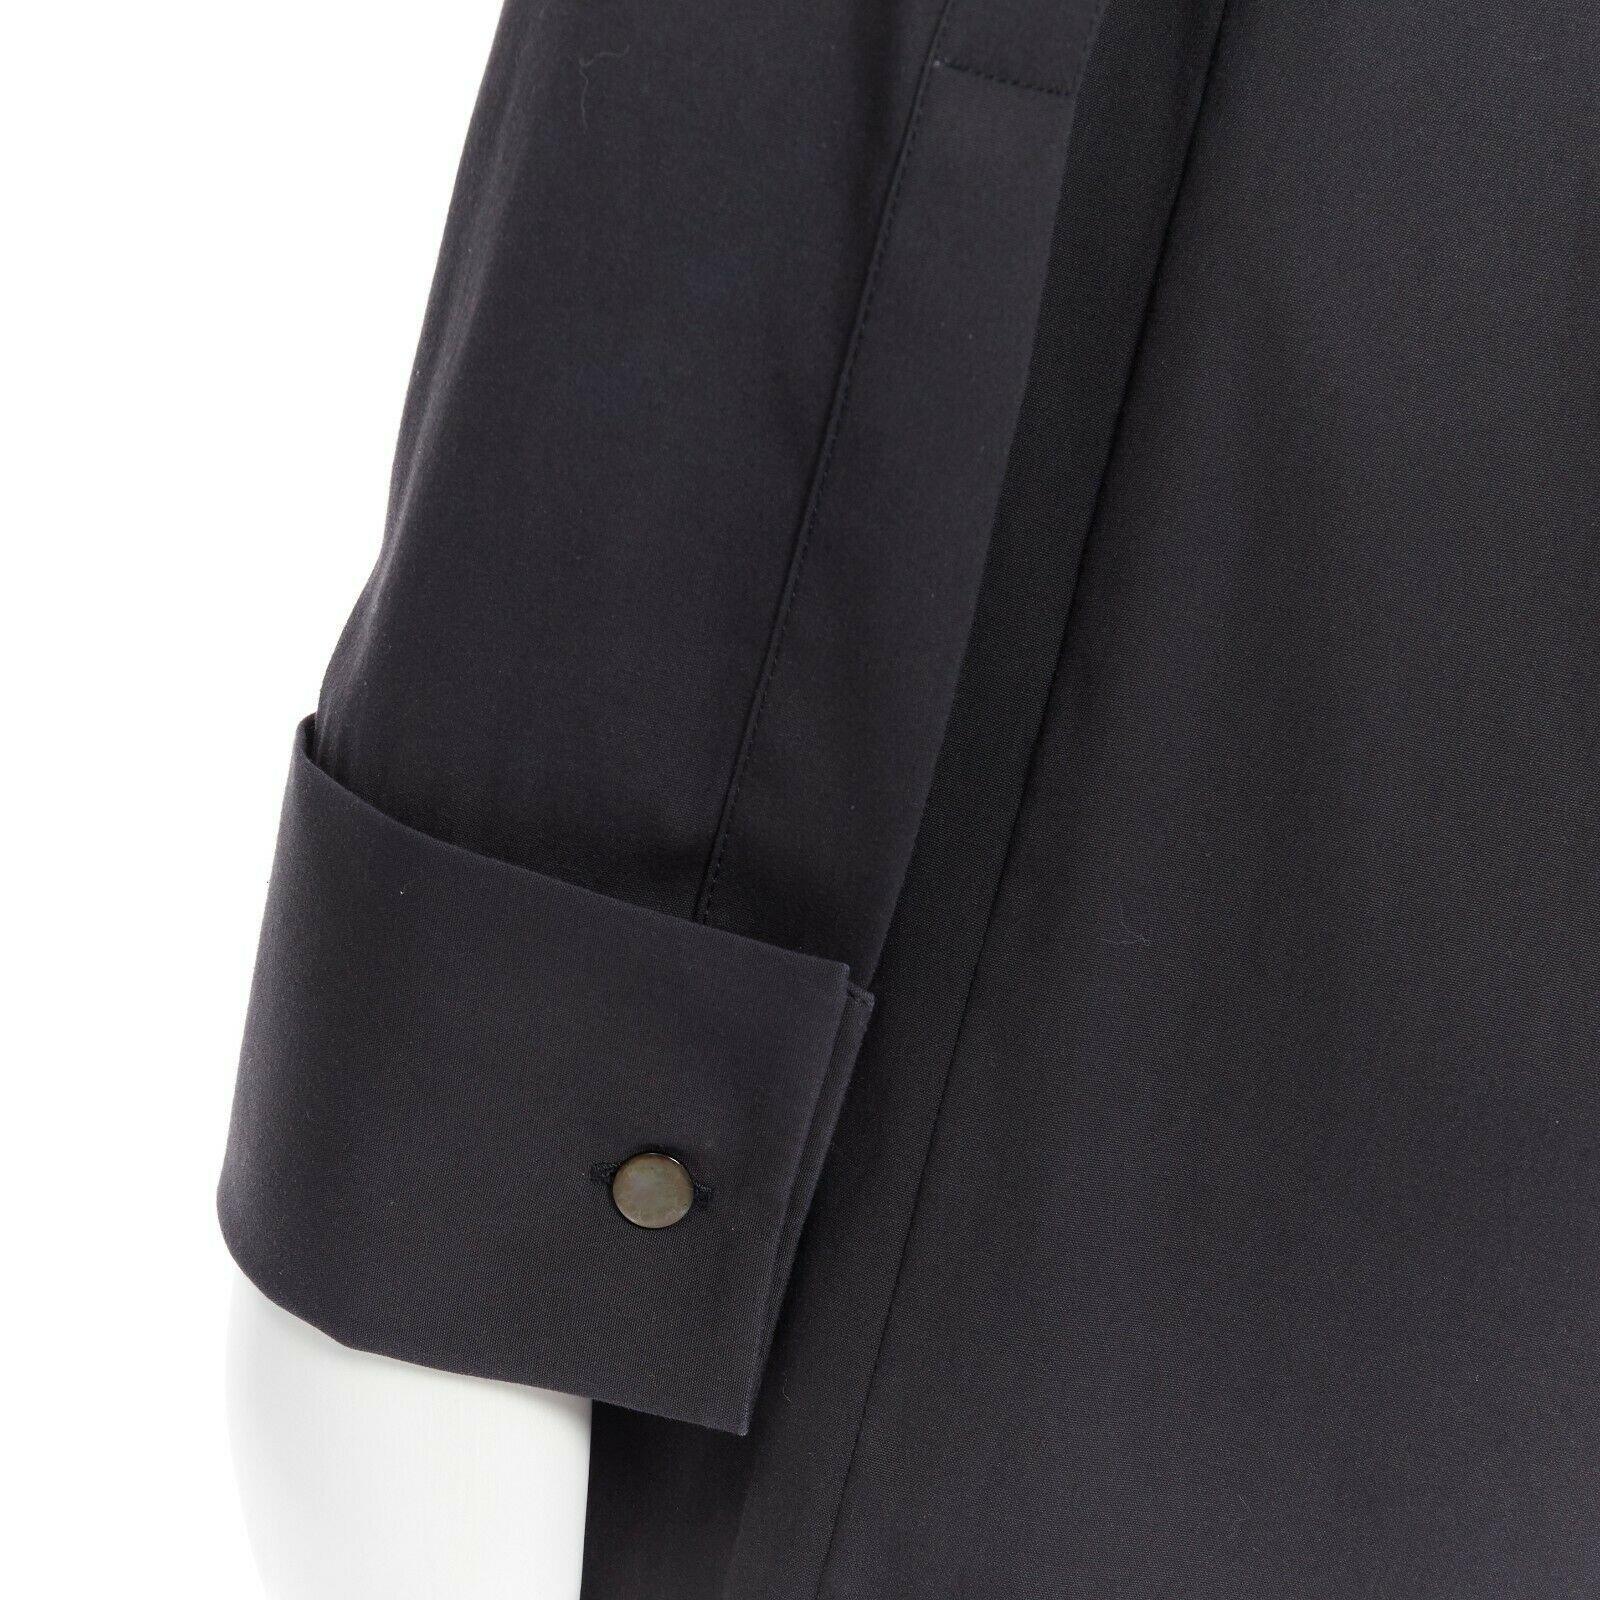 MICHAEL KORS black peak spread collar folded cuffs patch pocket long shirt US0
Reference: LNKO/A01148
Brand: Michael Kors
Material: Cotton
Color: Black
Pattern: Solid
Closure: Button
Extra Detail: Elongated shirt. Spread collar. Folded cuffs. Patch